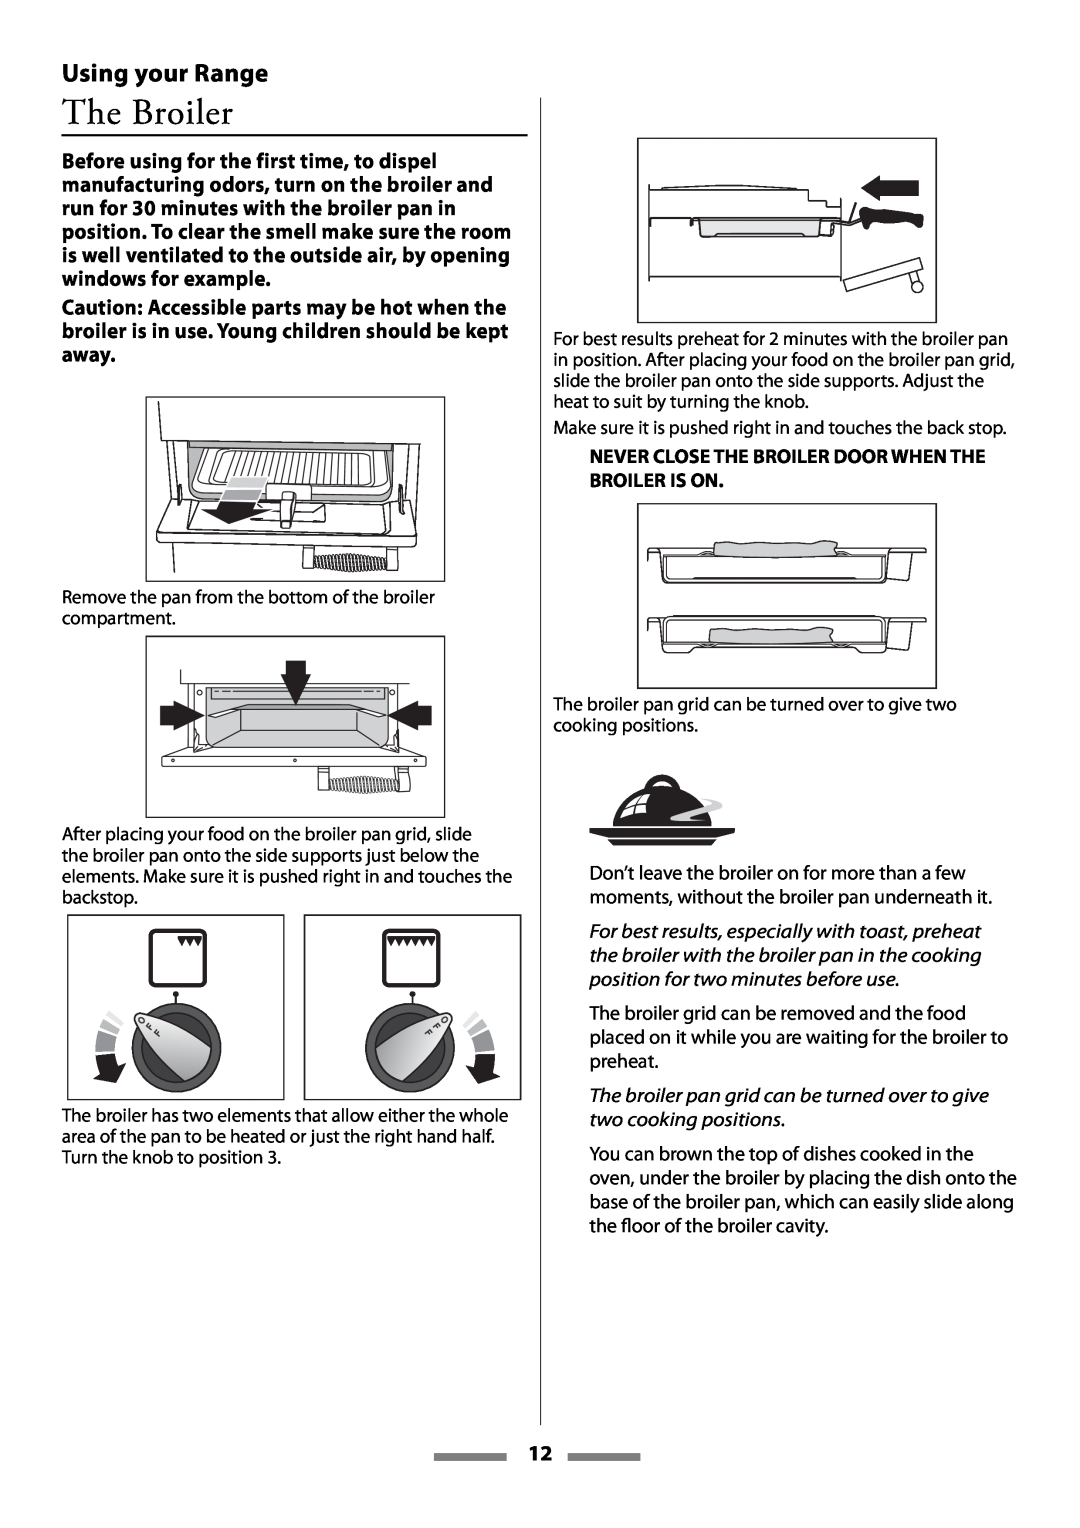 Aga Ranges Legacy 44 installation instructions Using your Range, Never Close The Broiler Door When The Broiler Is On 